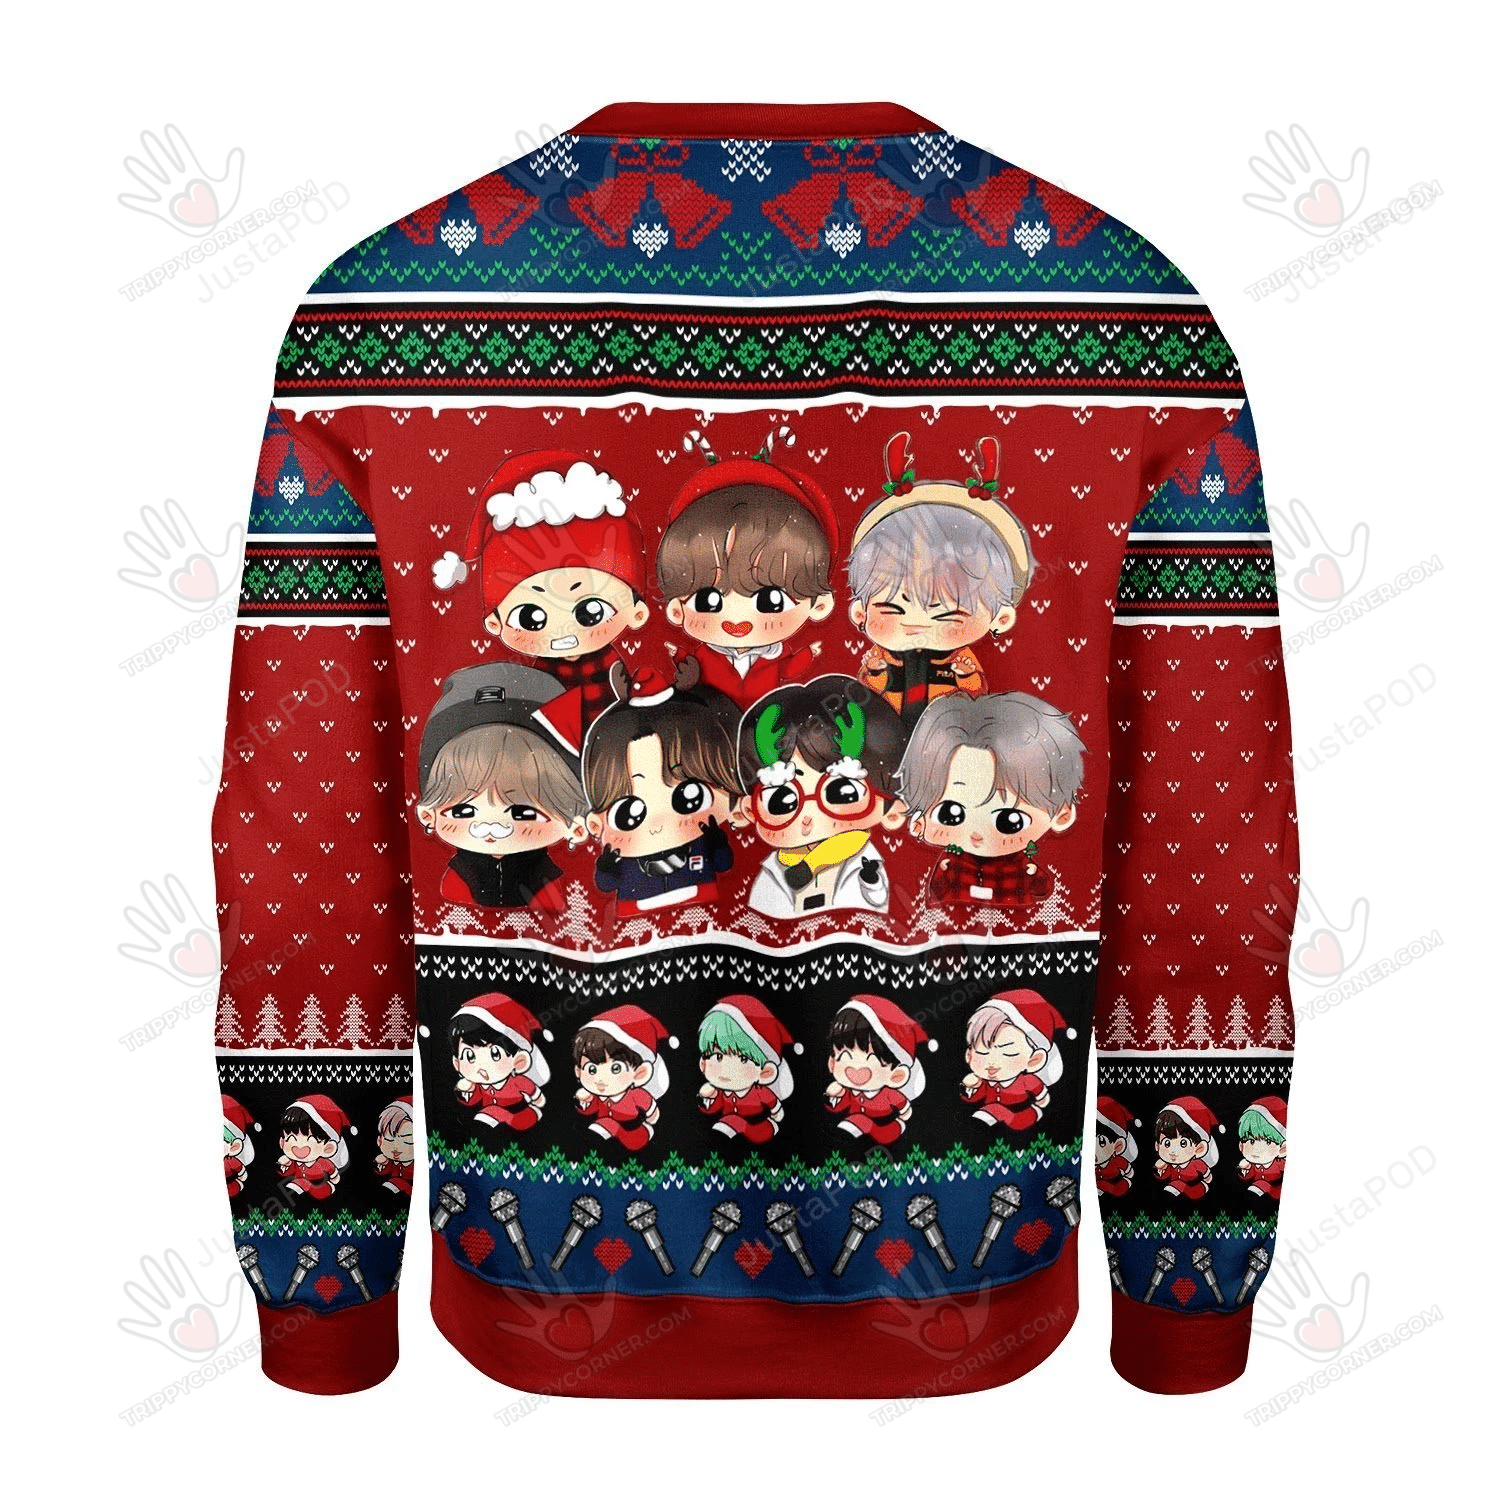 Bts Band Ugly Christmas Sweater, All Over Print Sweatshirt, Ugly Ugly Sweater Christmas Gift   2332